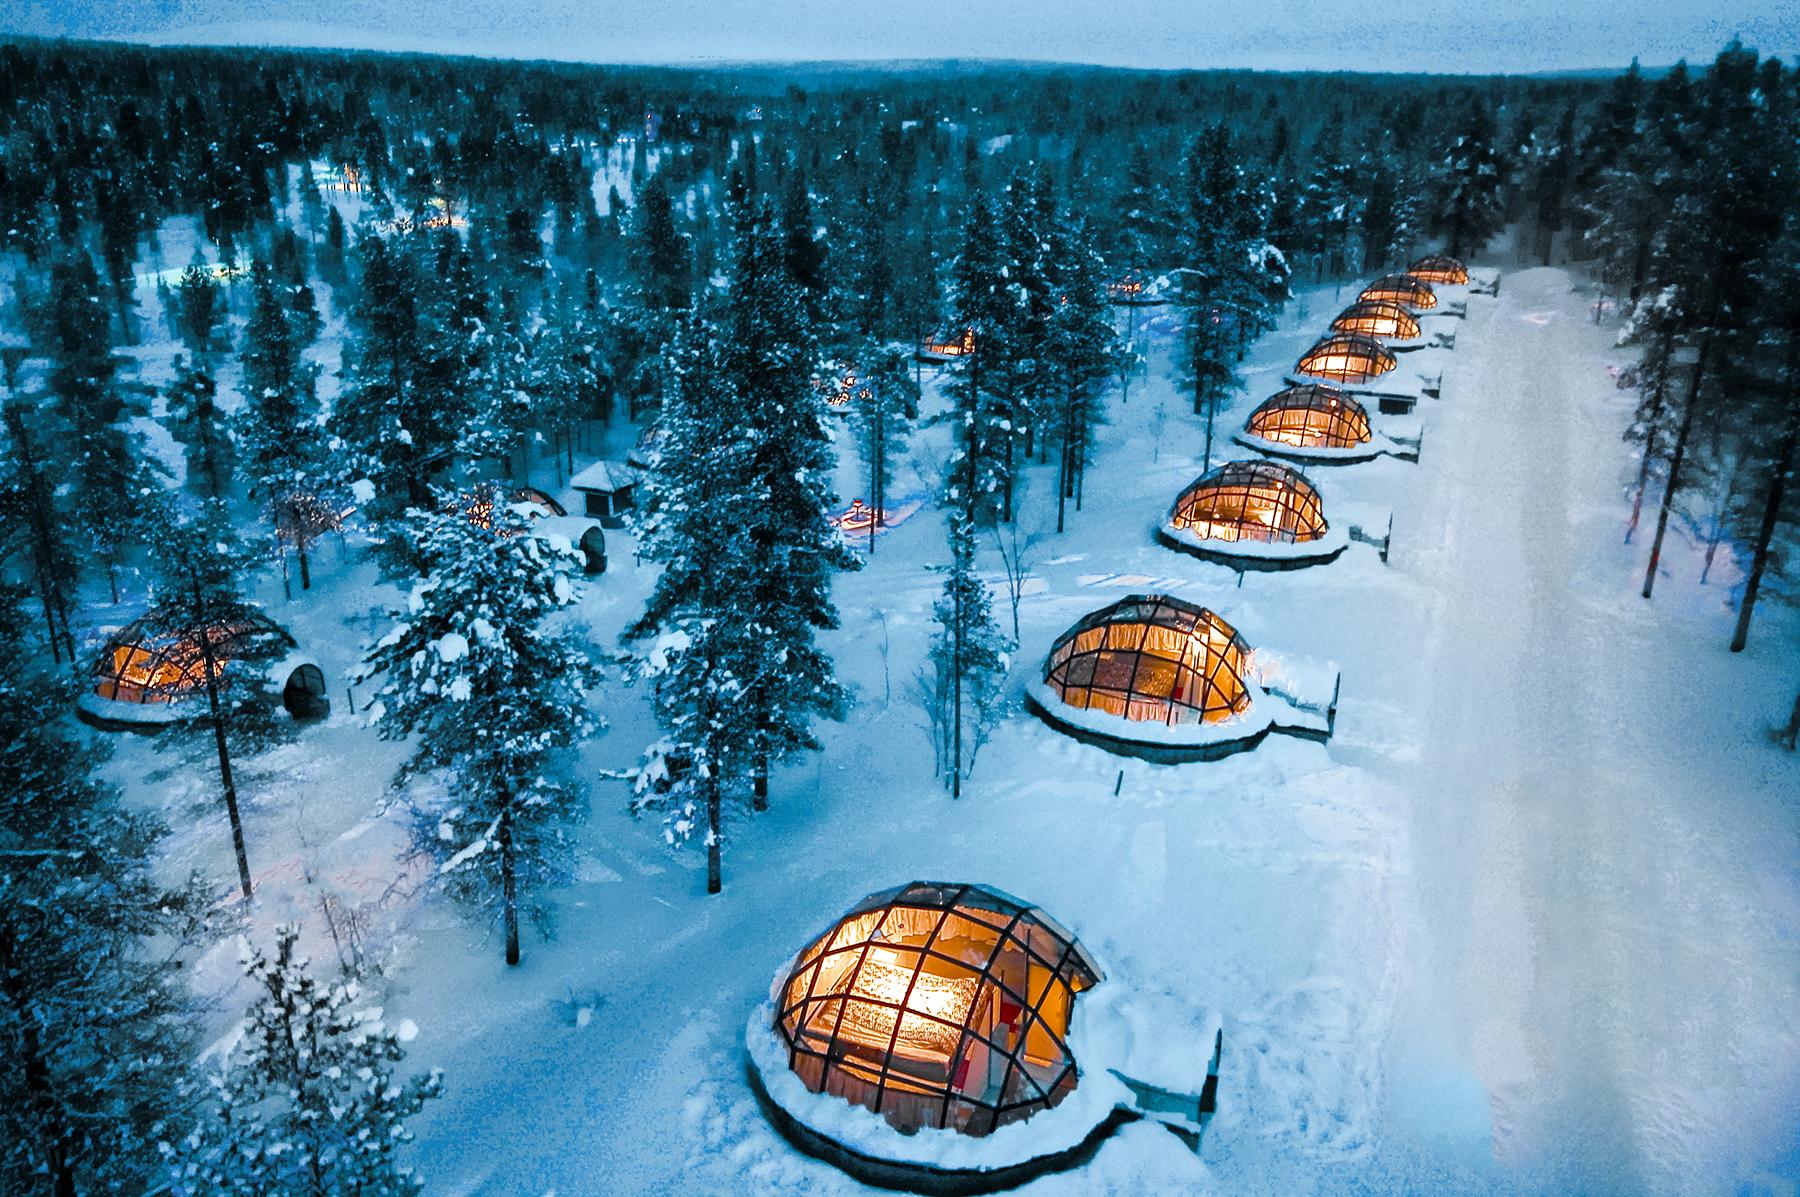 What It's Really Like to Spend the Night in an Igloo in Lapland, Finland